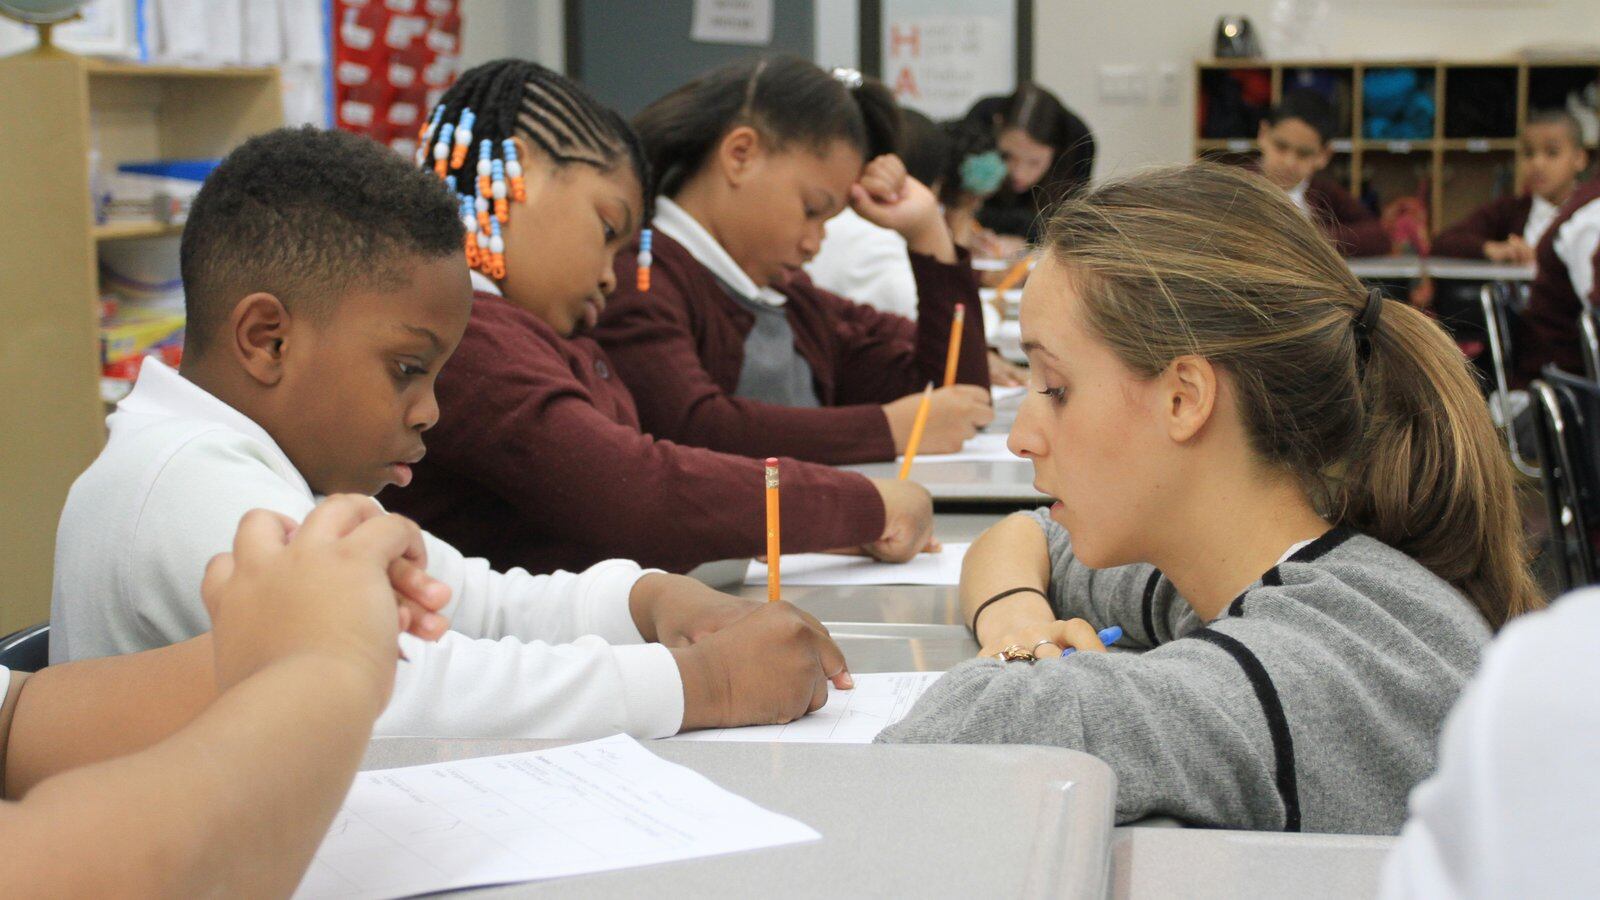 Fourth-grade students at Brownsville Ascend Lower Charter School in Brooklyn.